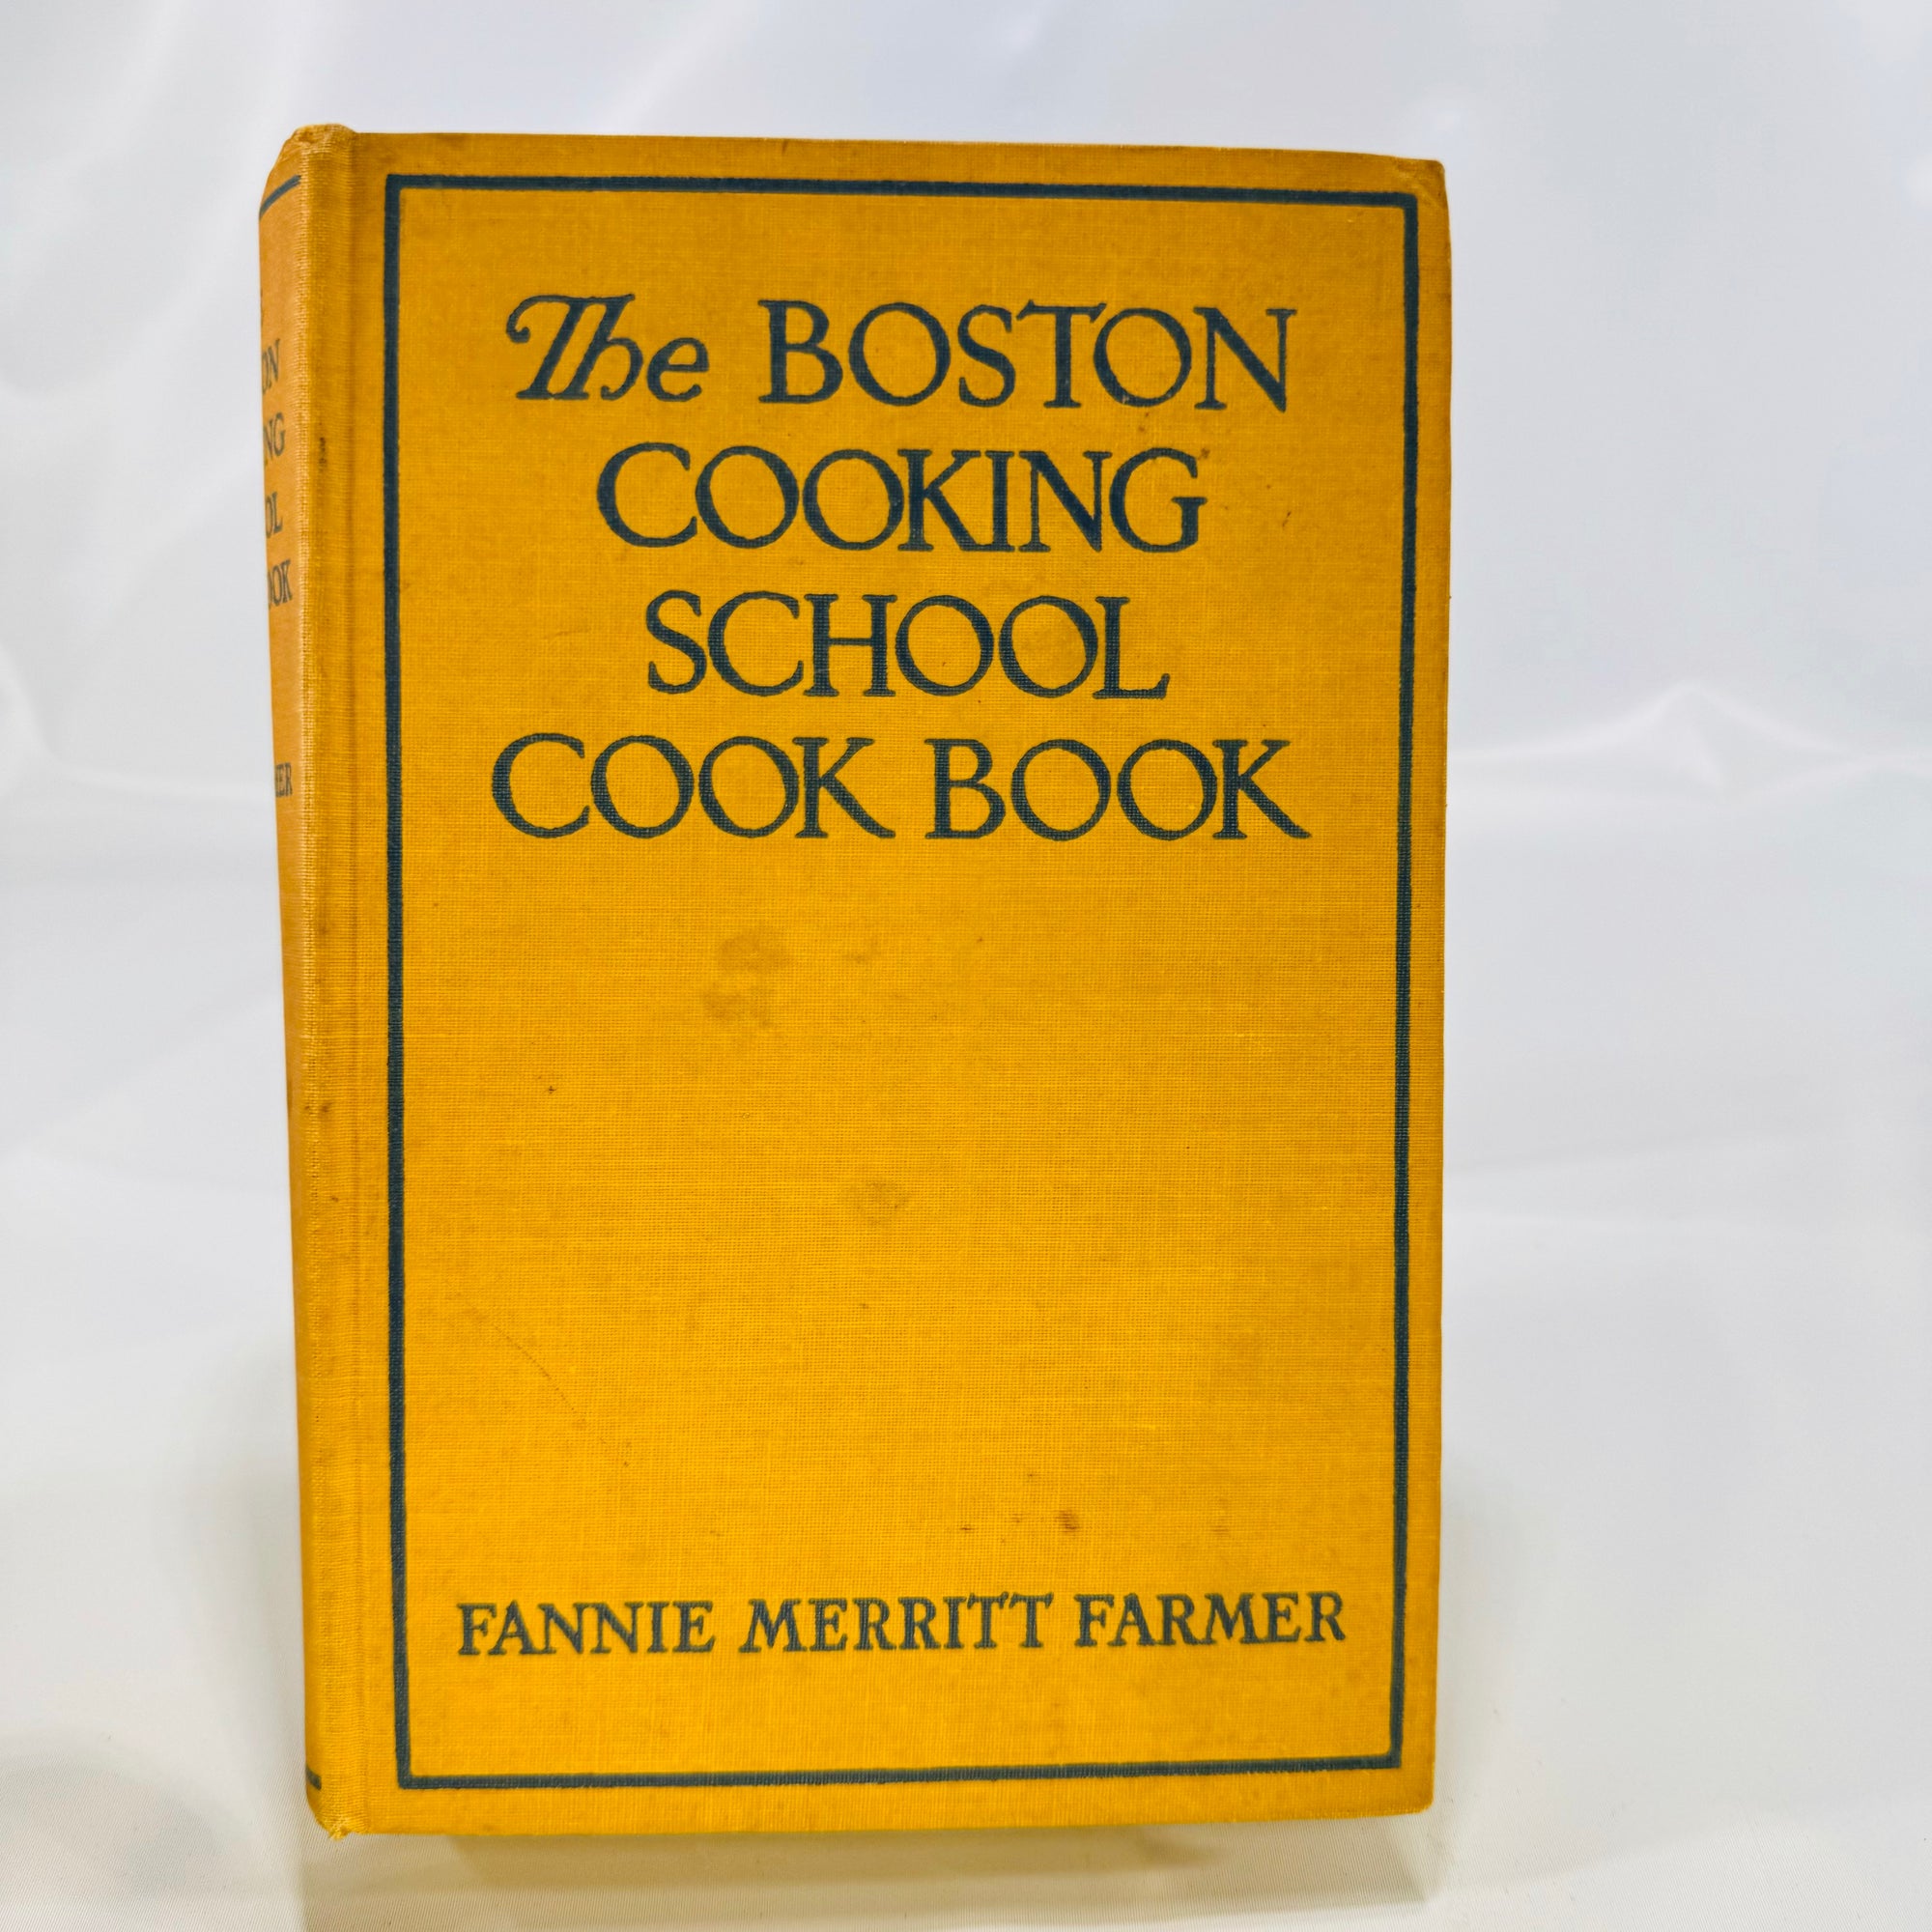 The Boston Cooking-School Cookbook by Fannie Merritt Farmer 1945 Little Brown and Company